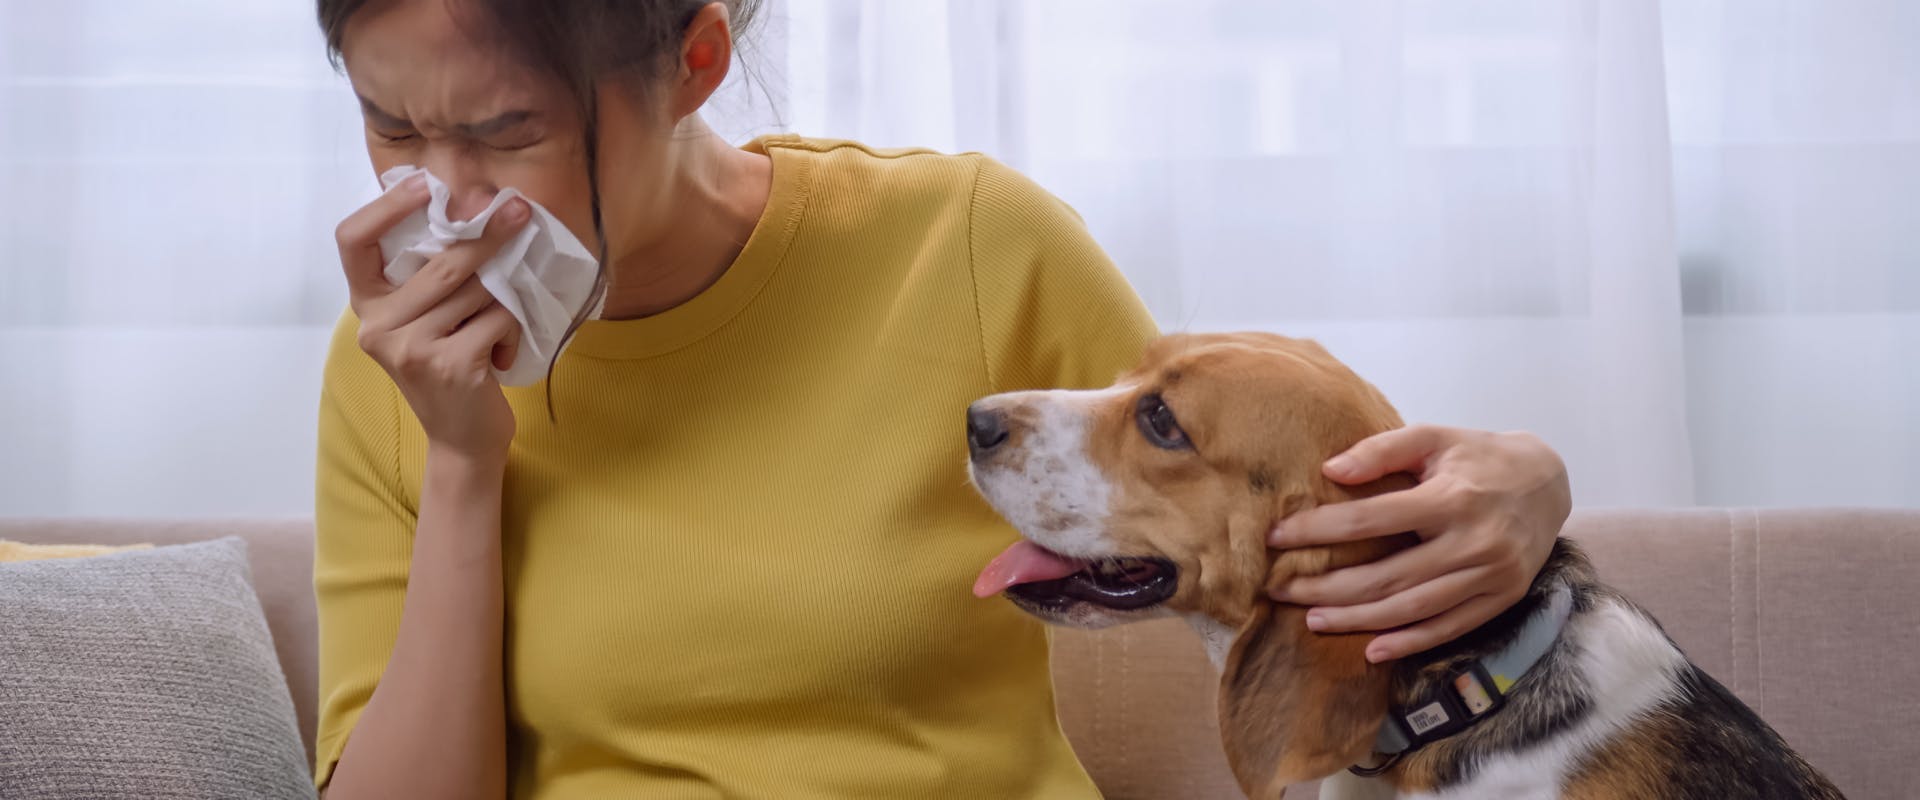 a woman with a yellow top sneezing into a tissue while sat next to a beagle on a couch